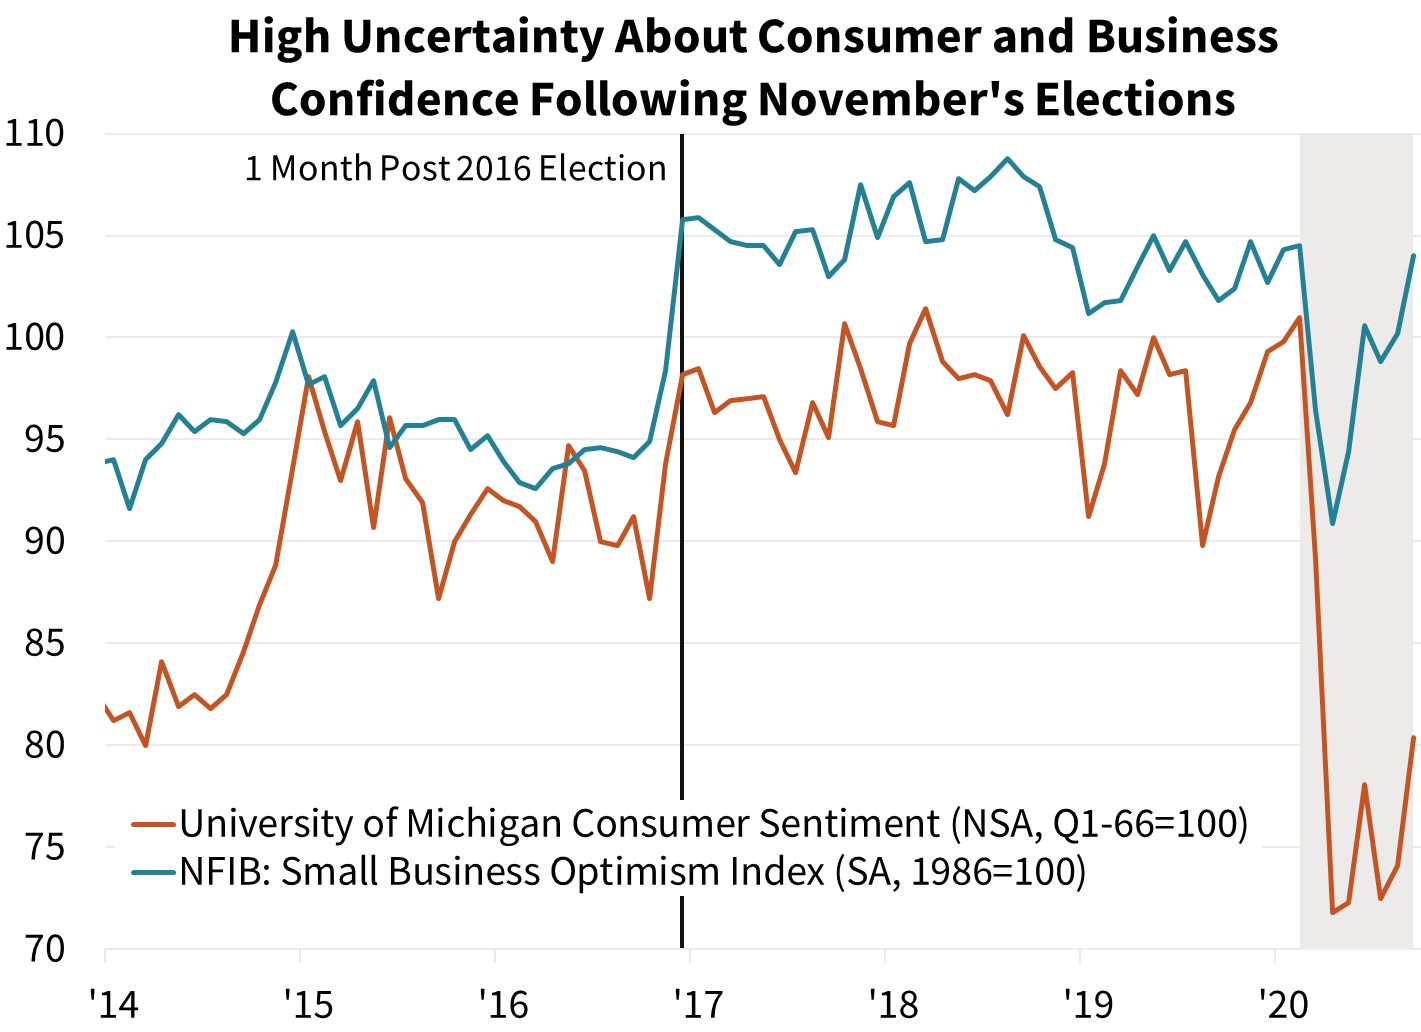  High Uncertainty About Consumer and Business Confidence Following November’s Elections
